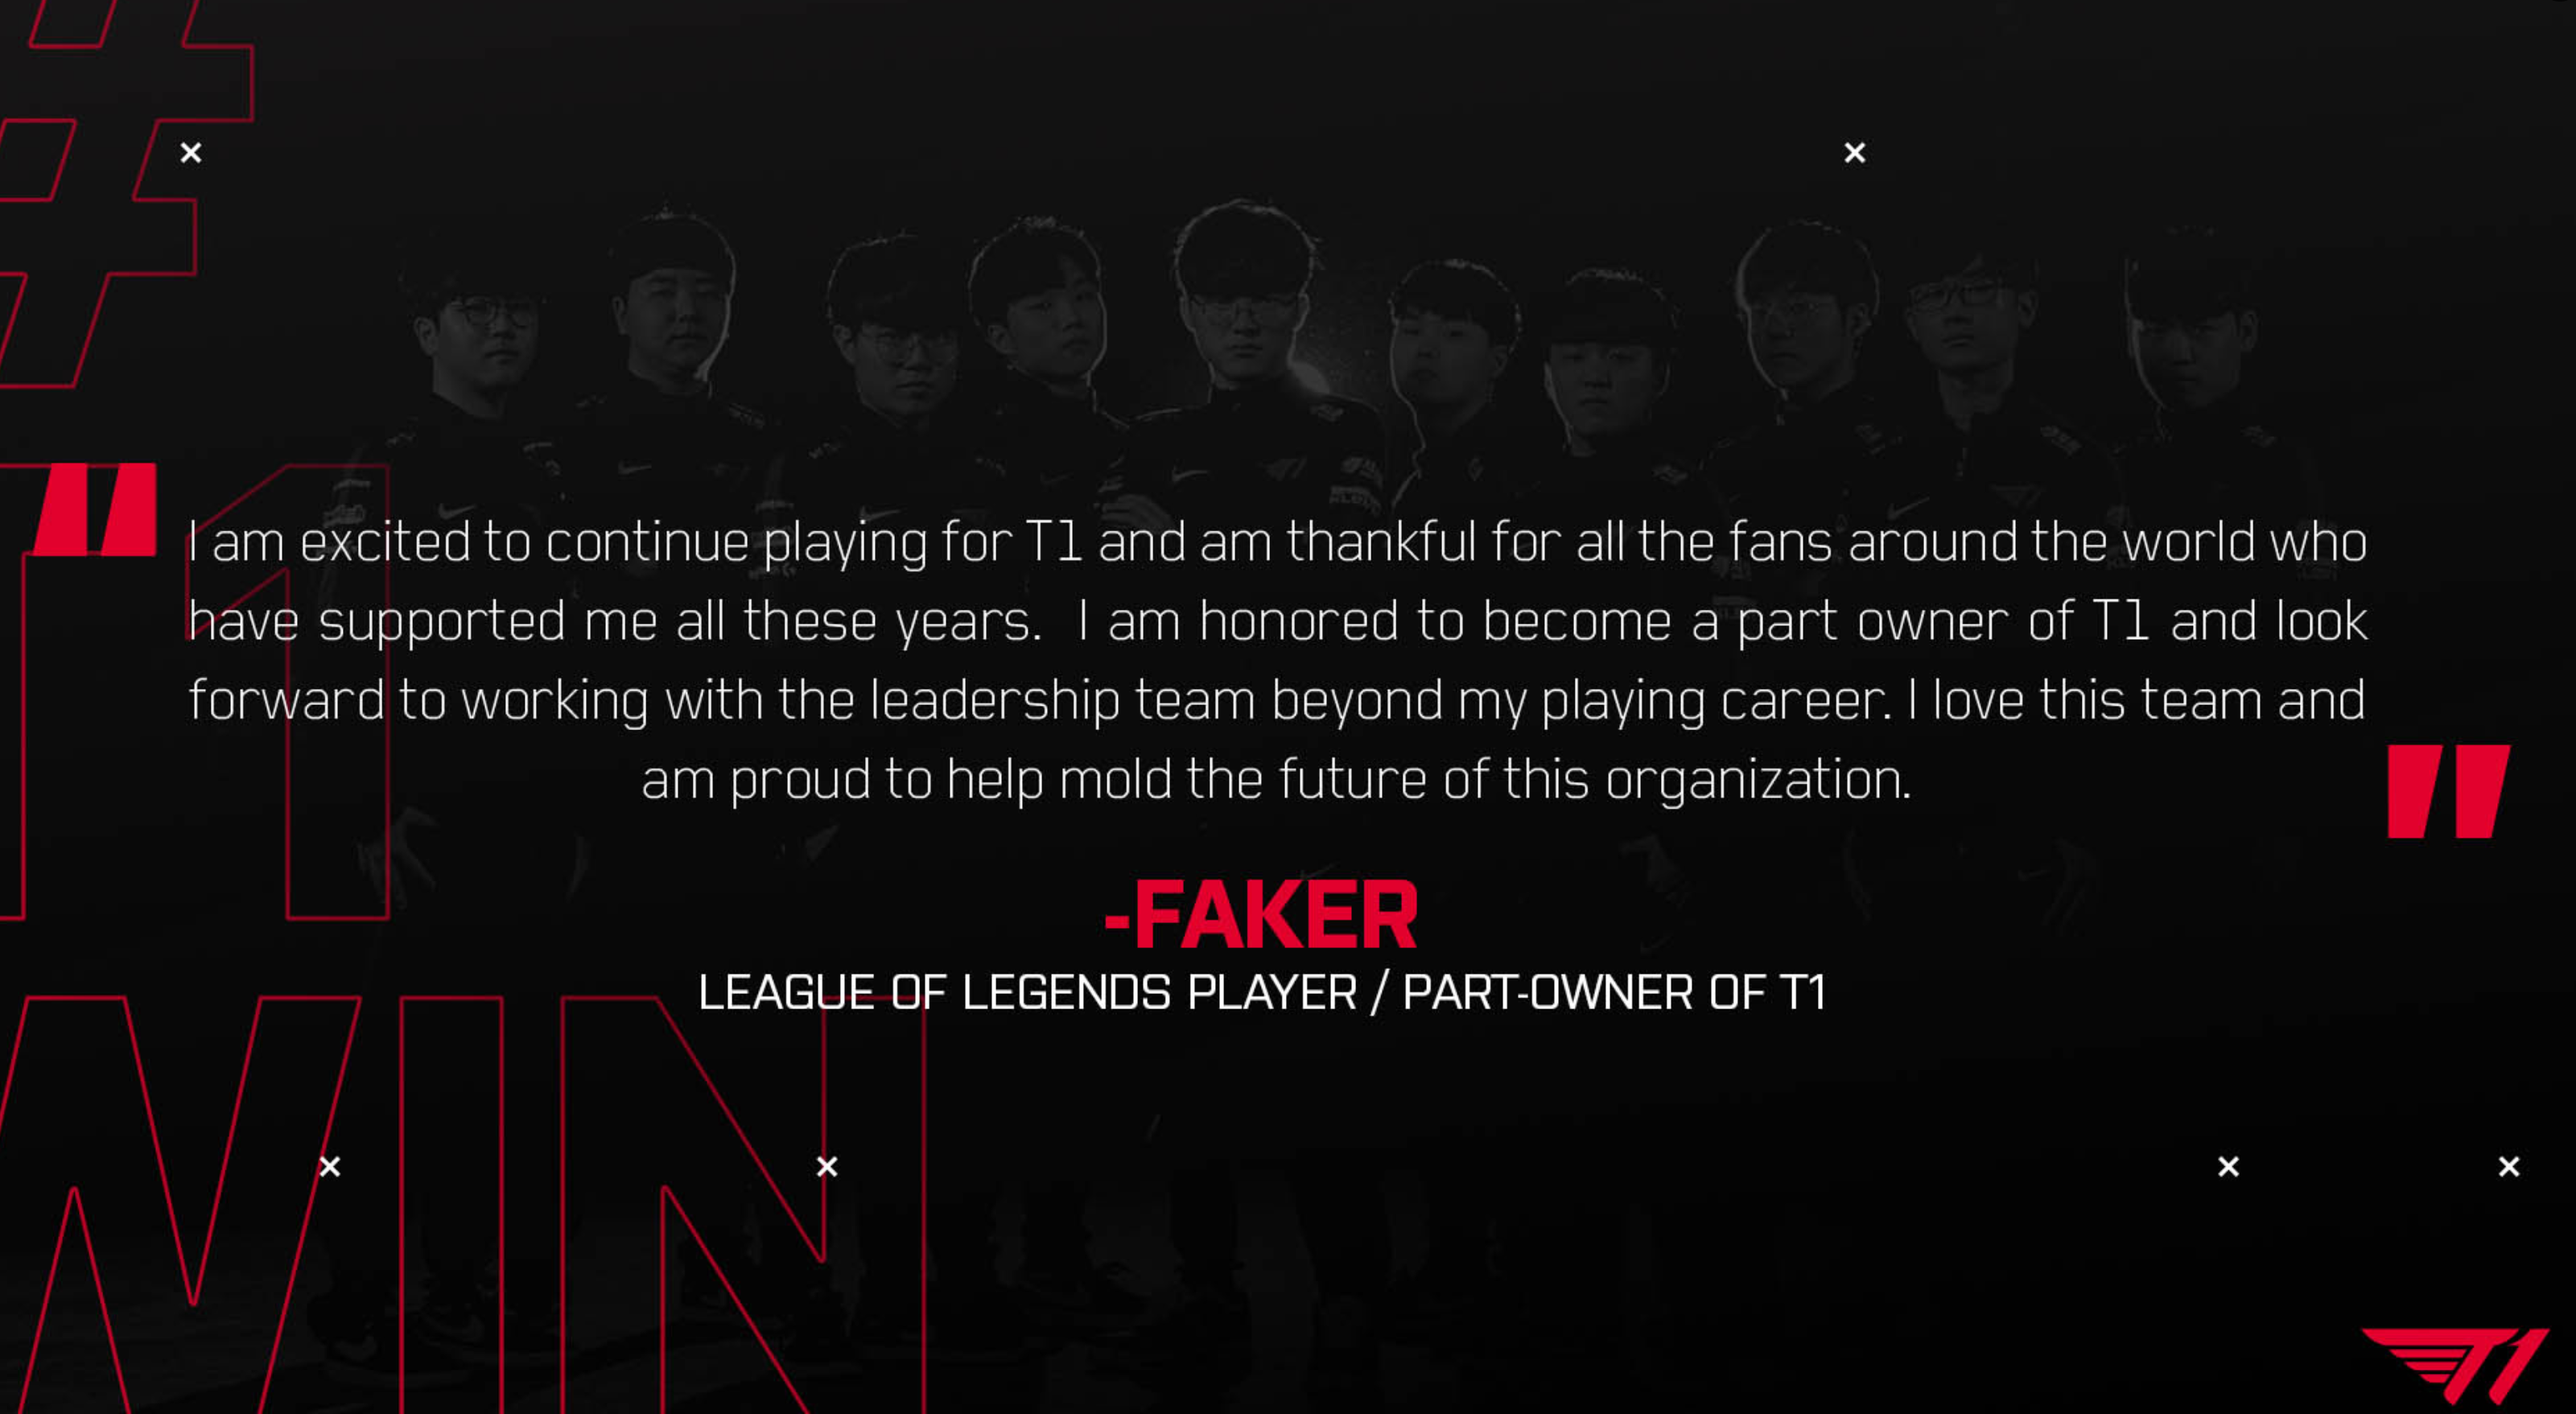 Faker becomes part owner of T1